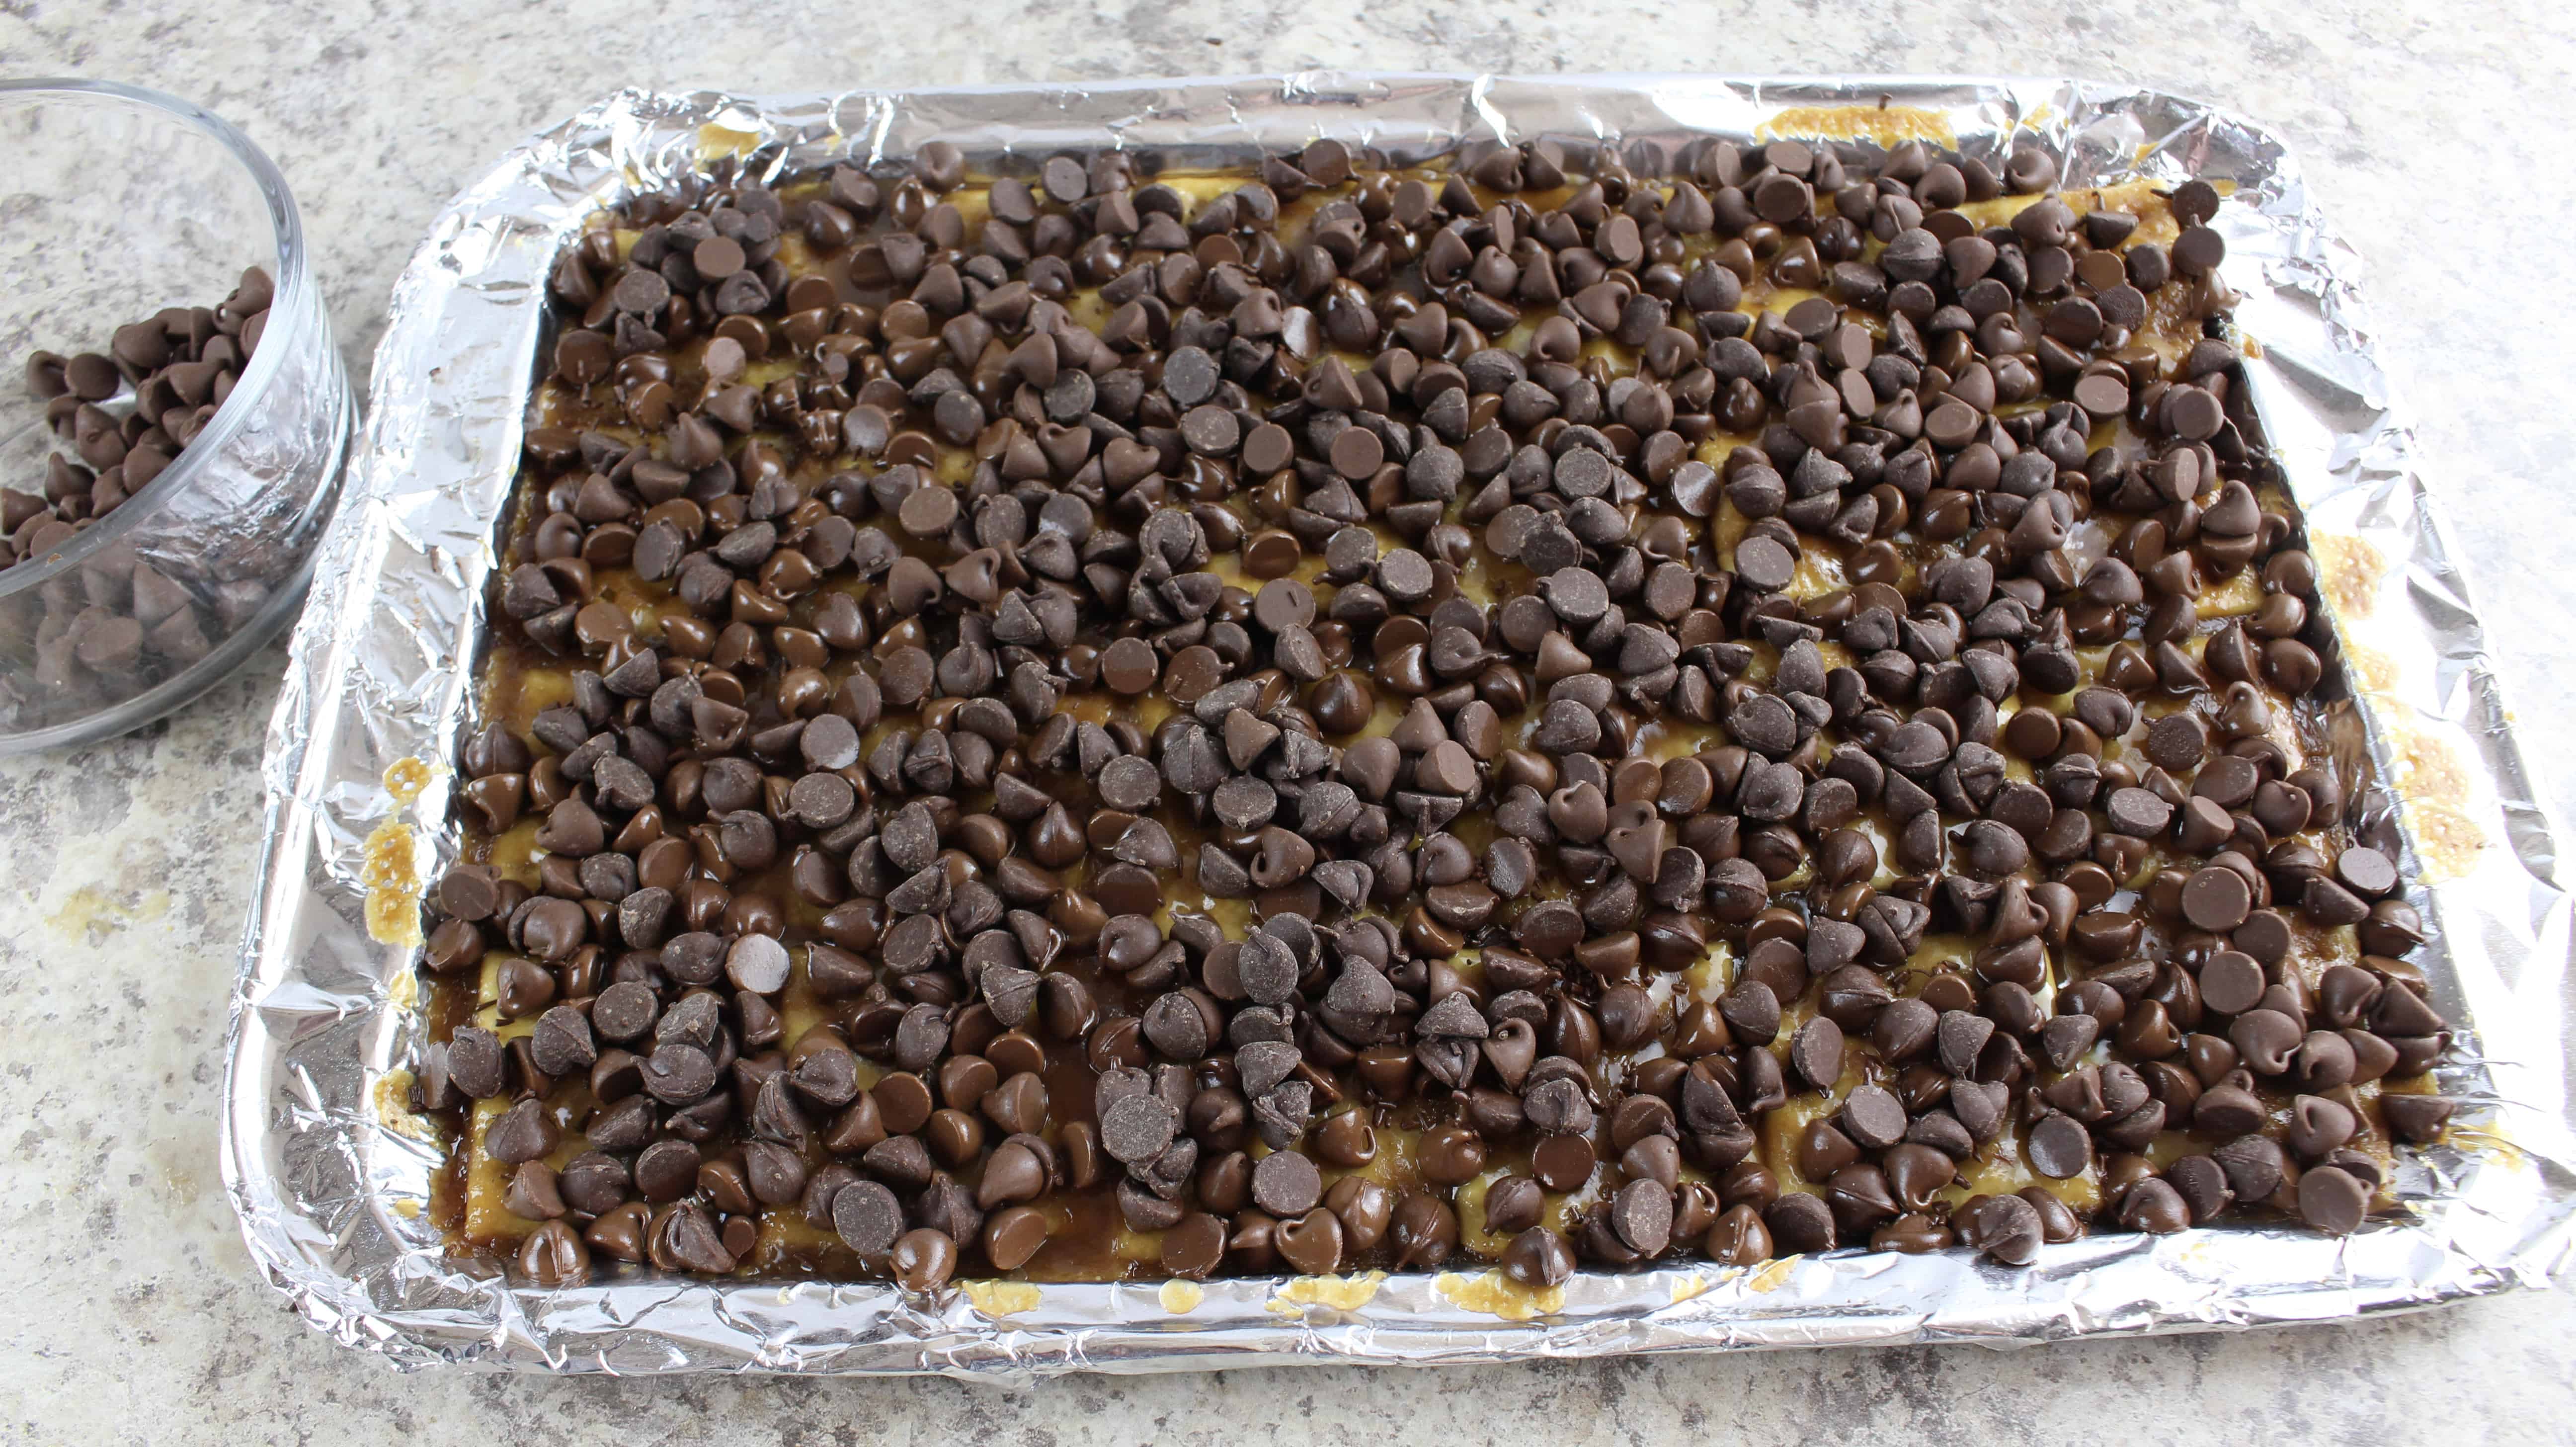 chocolate chips on crackers in a cookie sheet